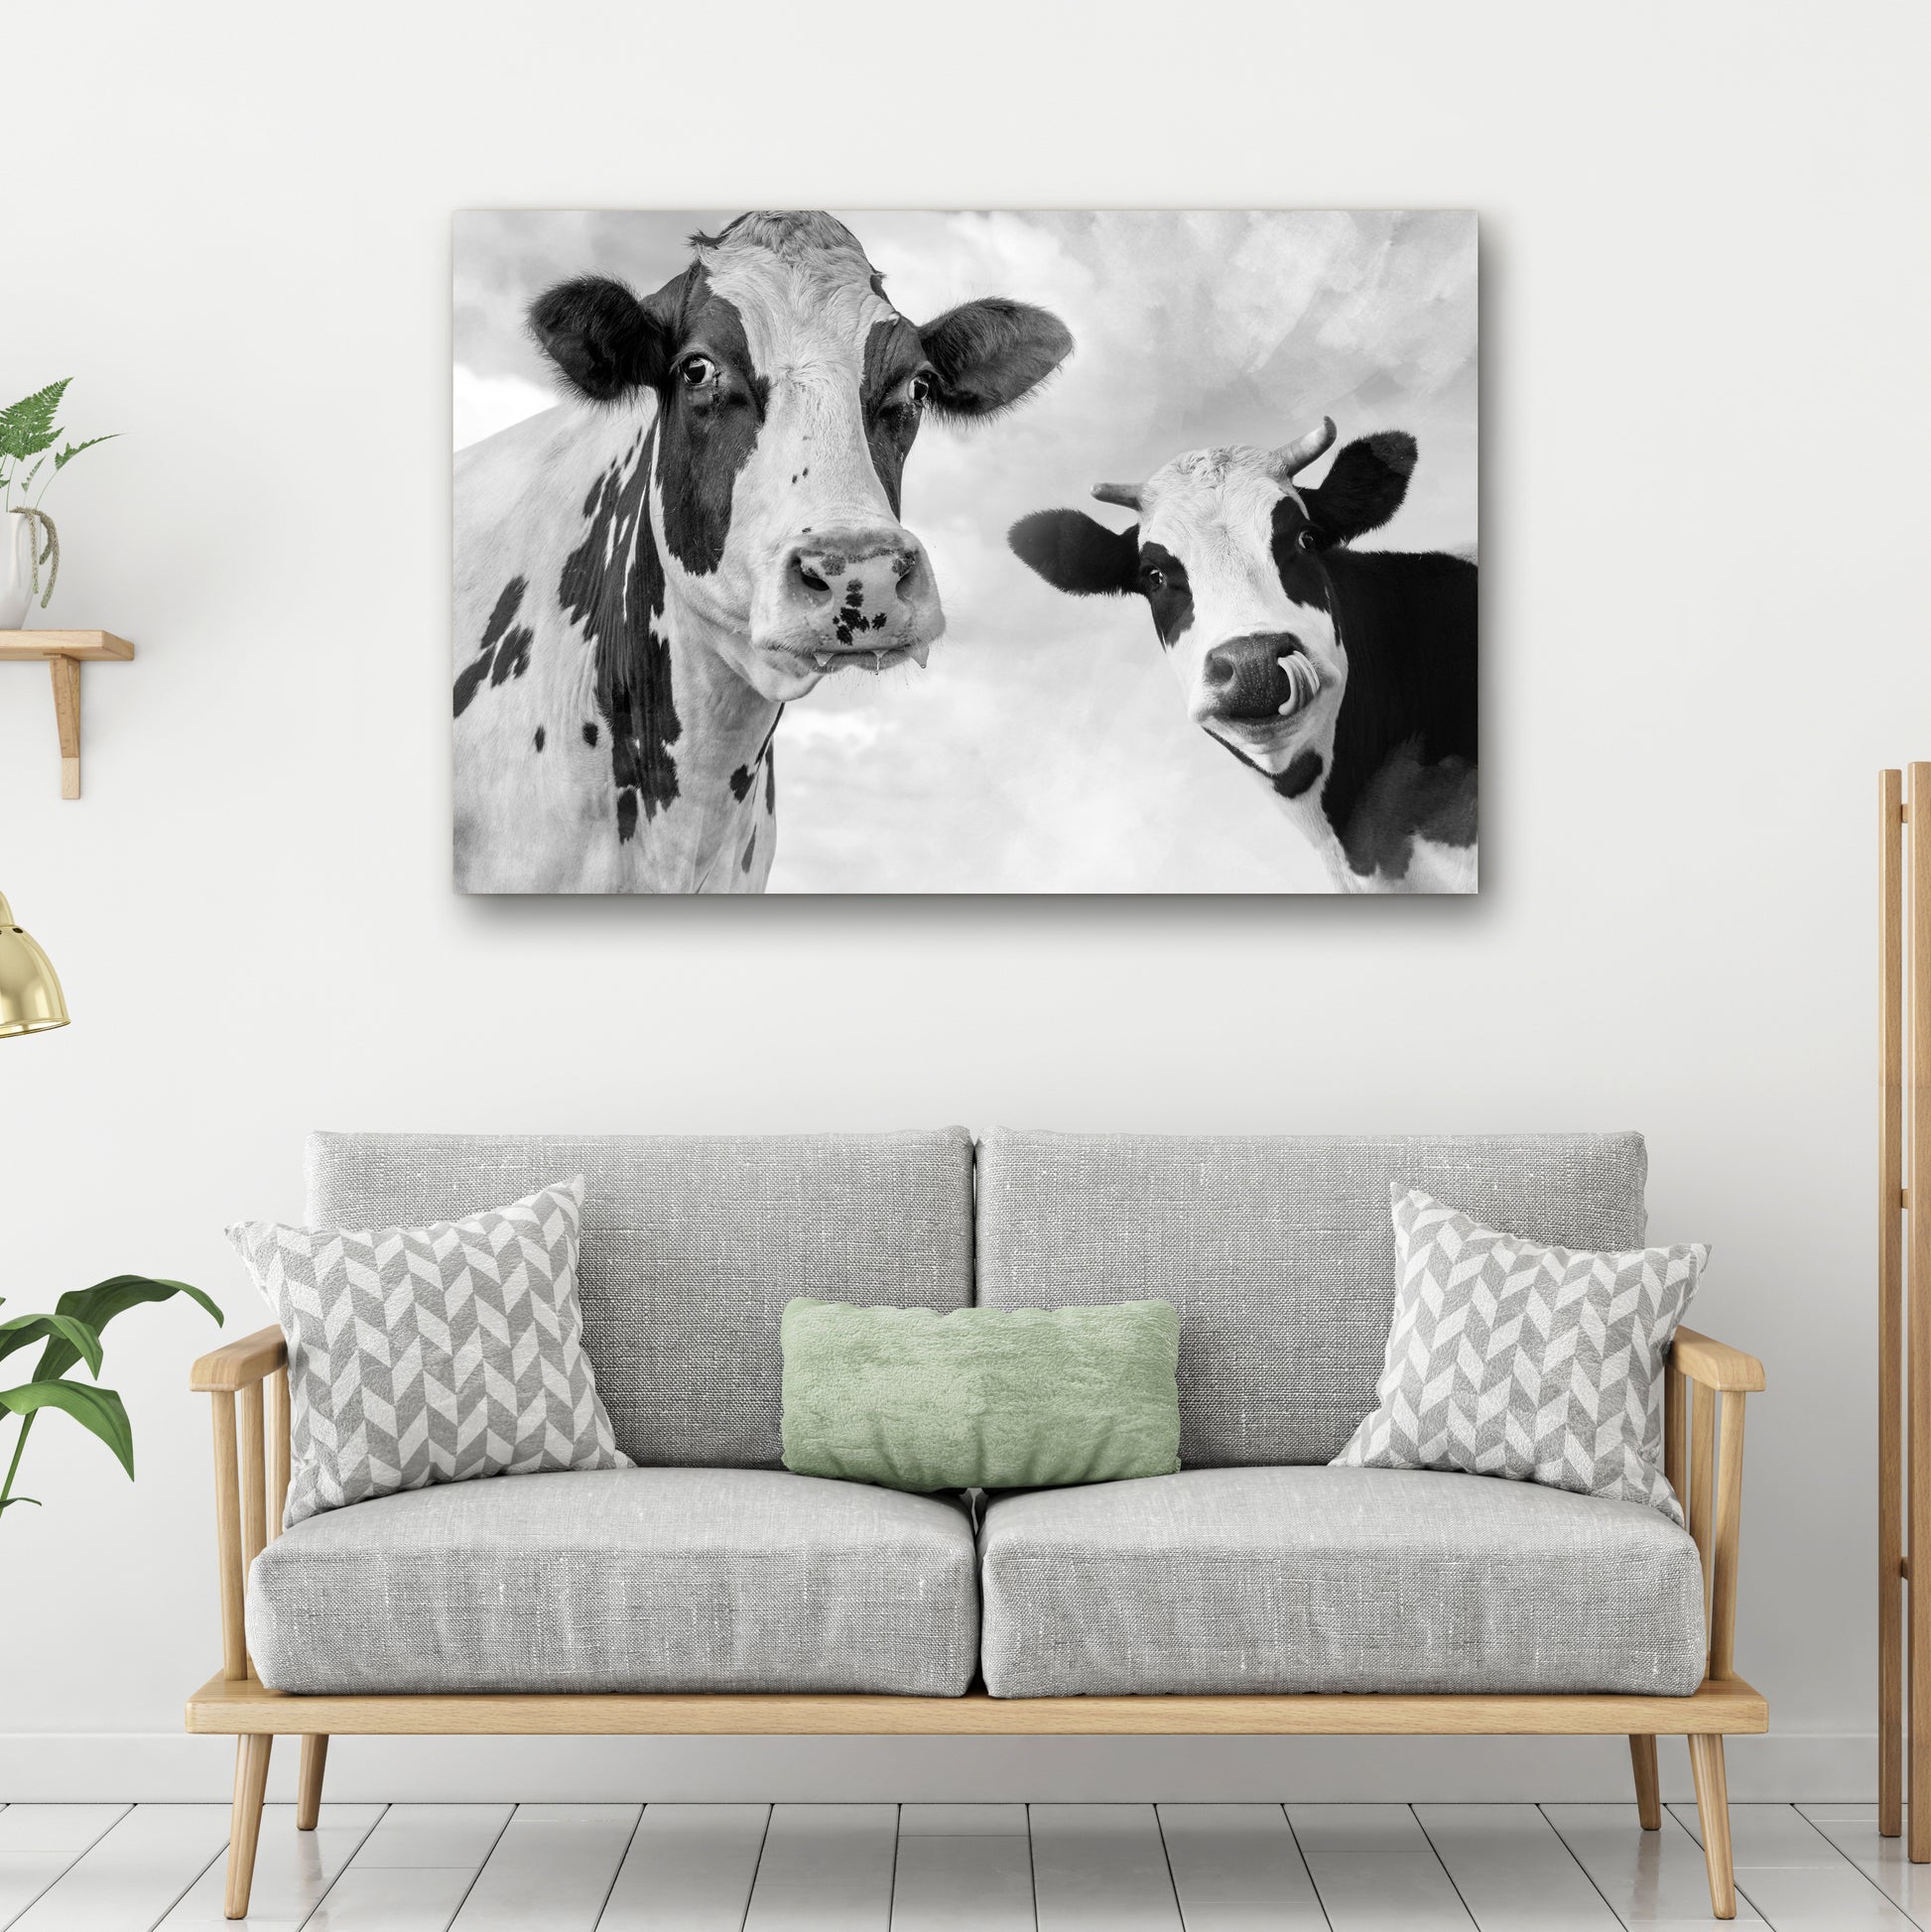 Monochrome Holstein Cows Canvas Wall Art Style 2 - Image by Tailored Canvases